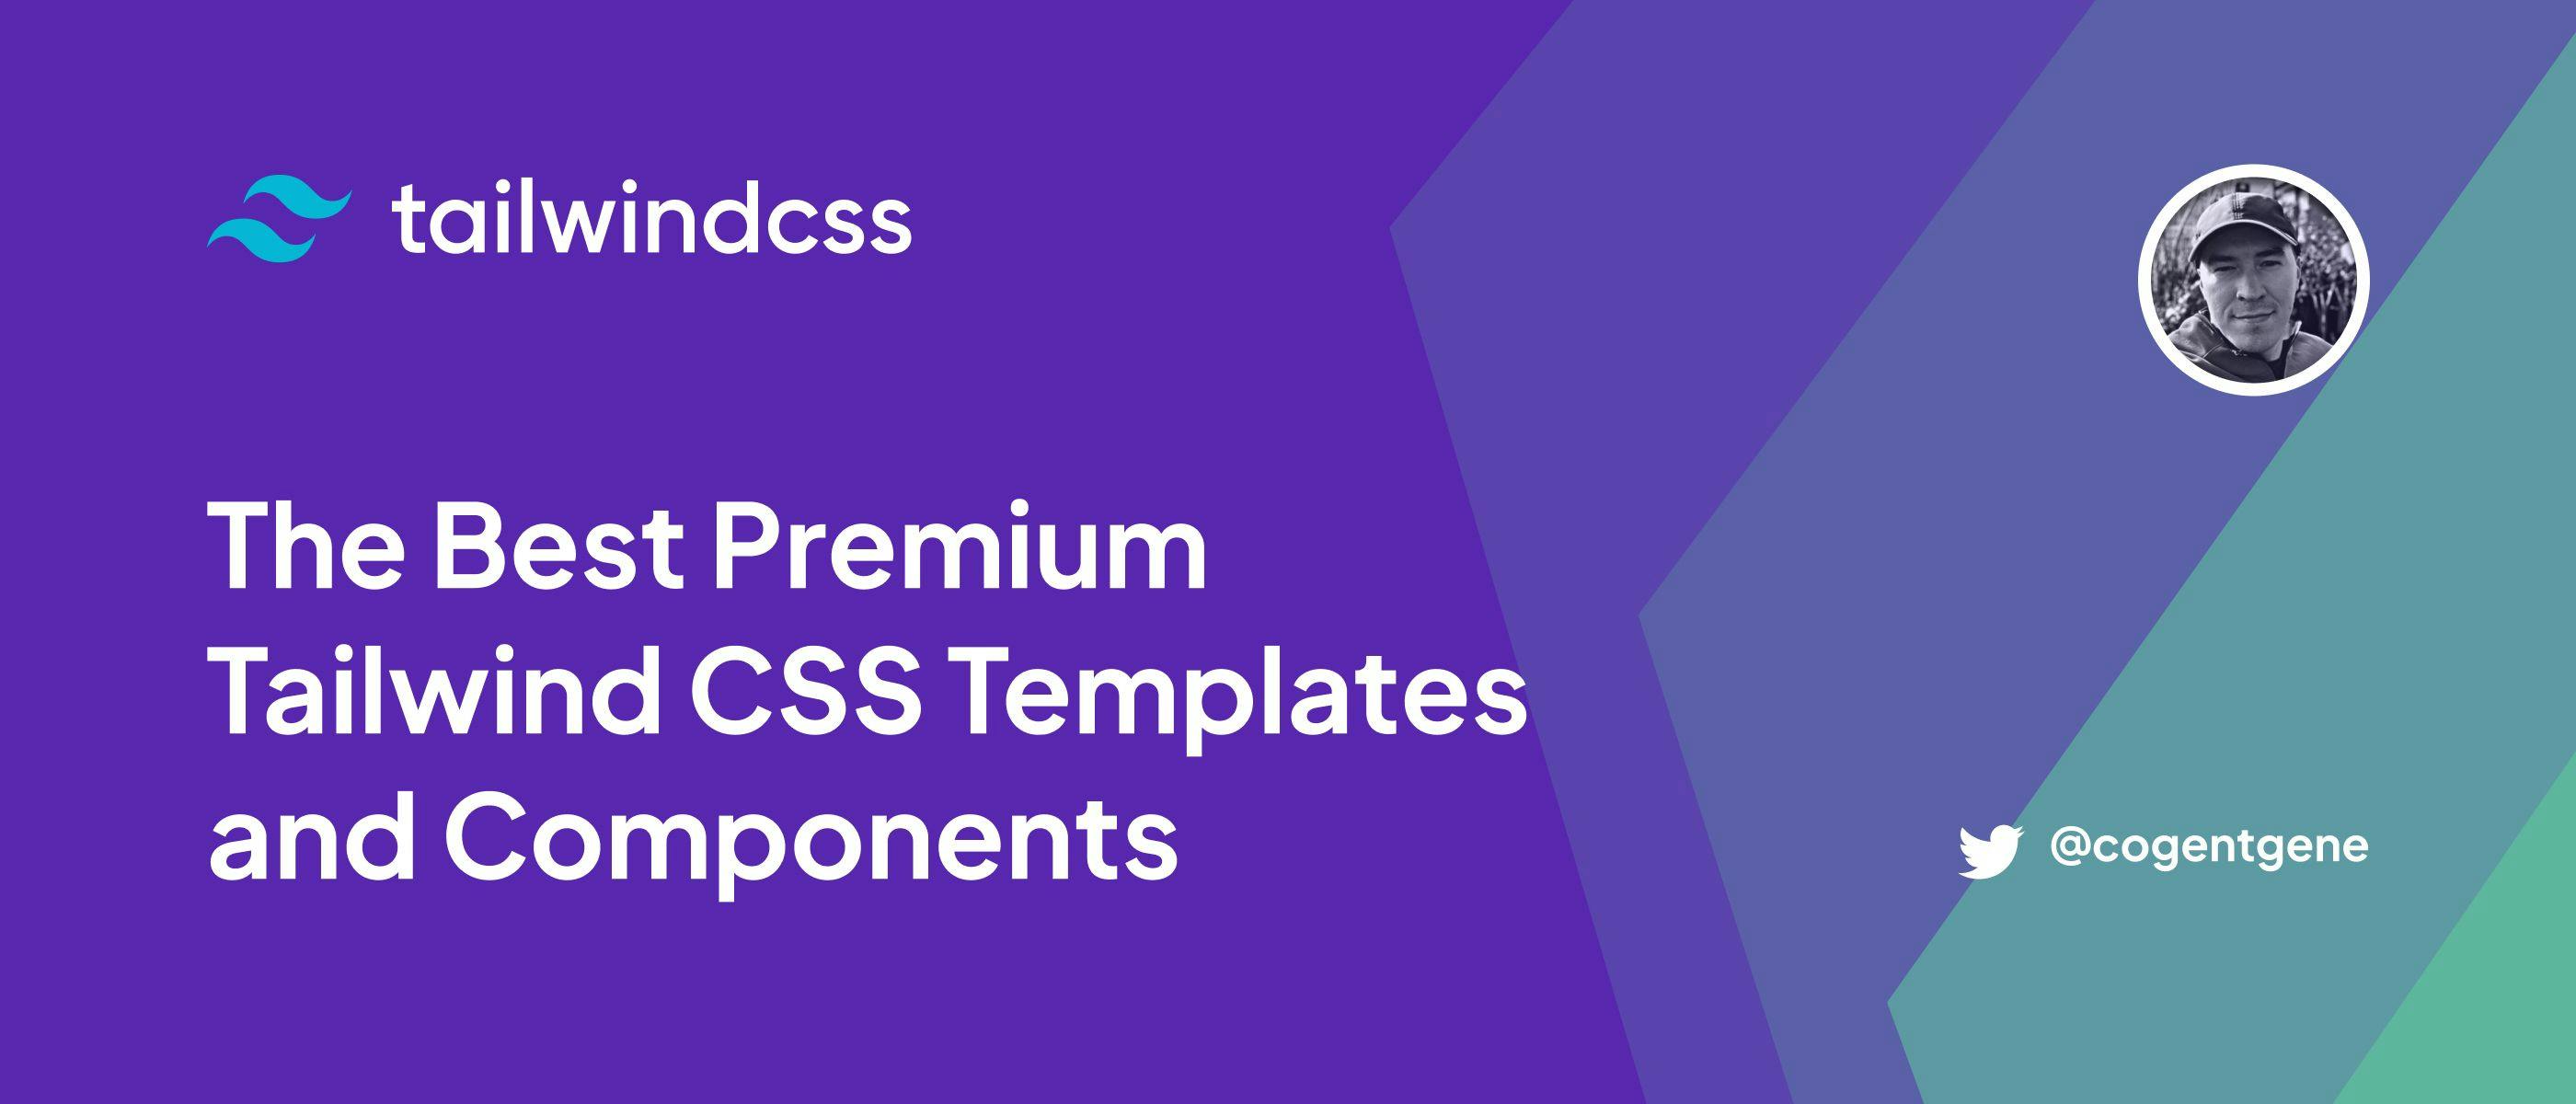 /4-tailwind-css-options-for-premium-templates-and-components feature image